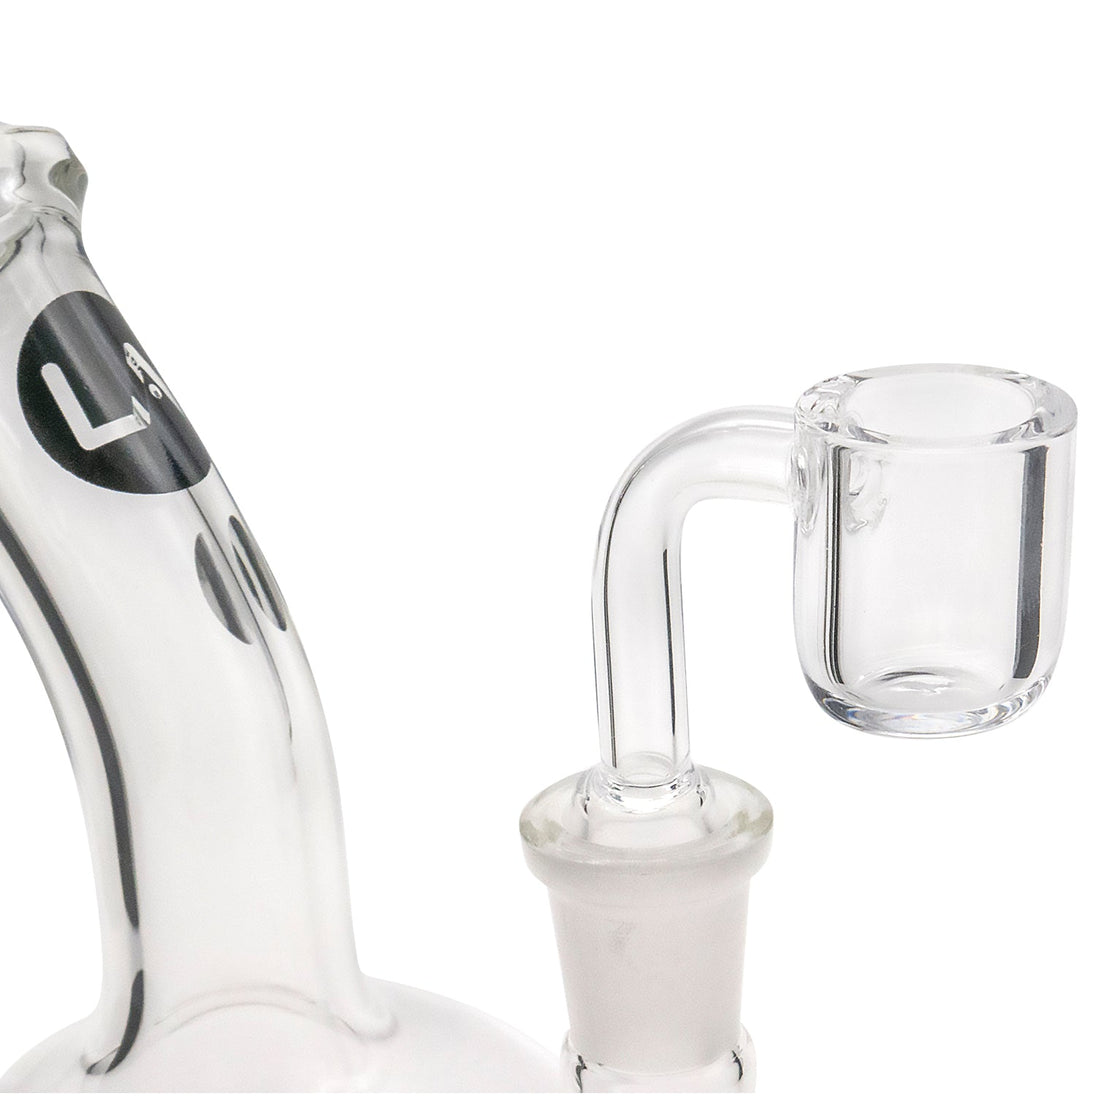 LA Pipes Bubble Base Concentrate Rig - Glasss Station